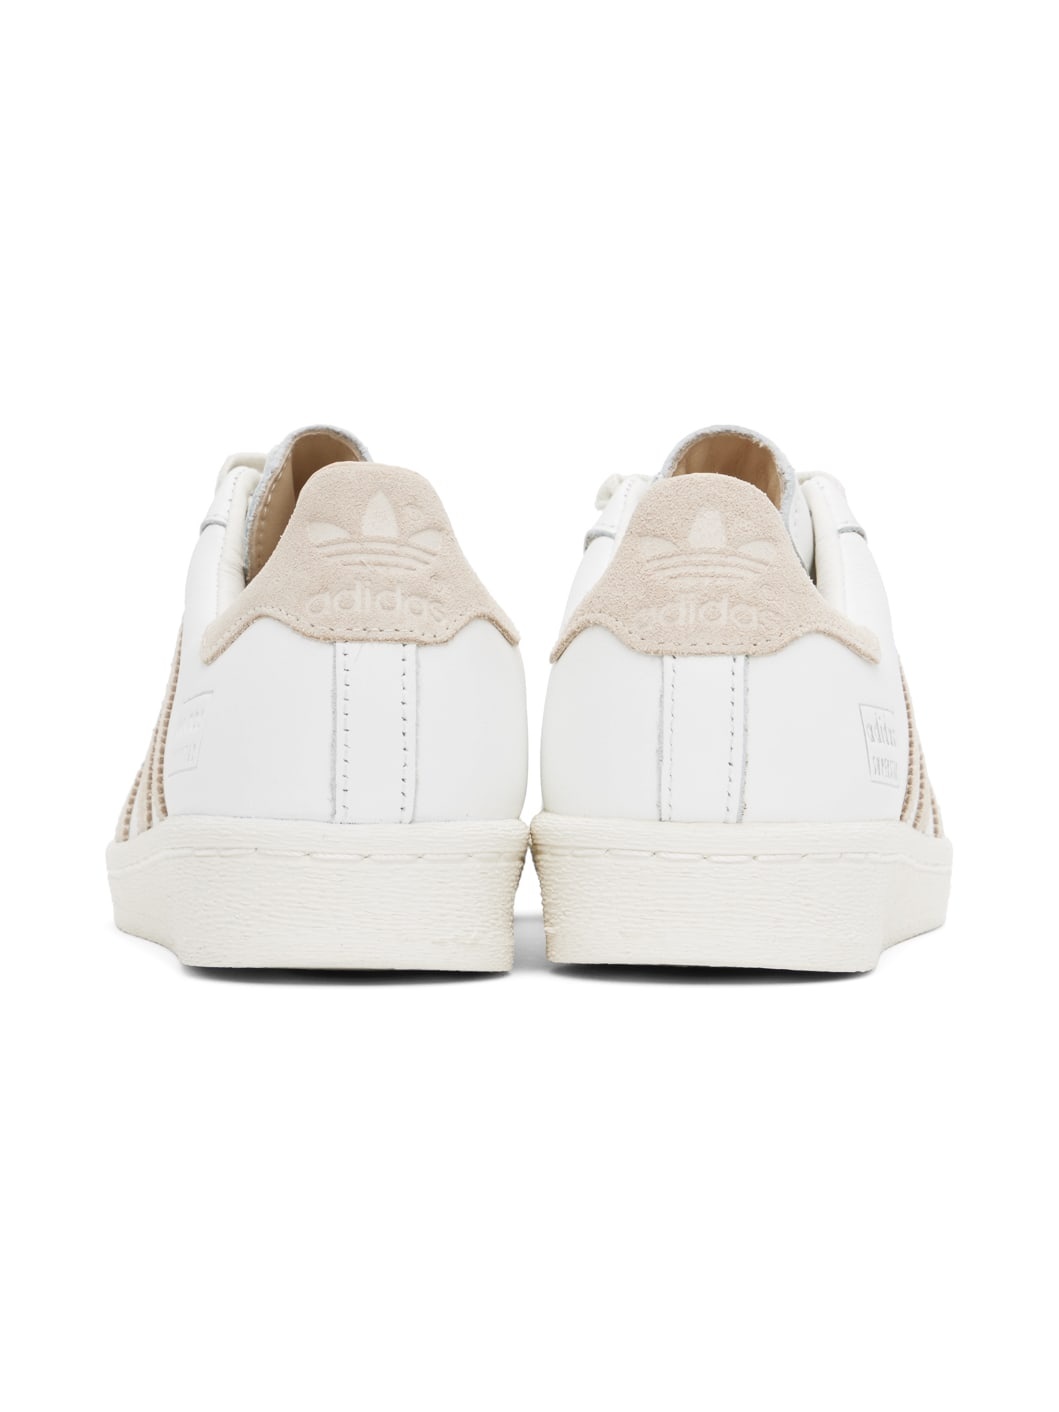 Off-White Superstar Lux Sneakers - 2